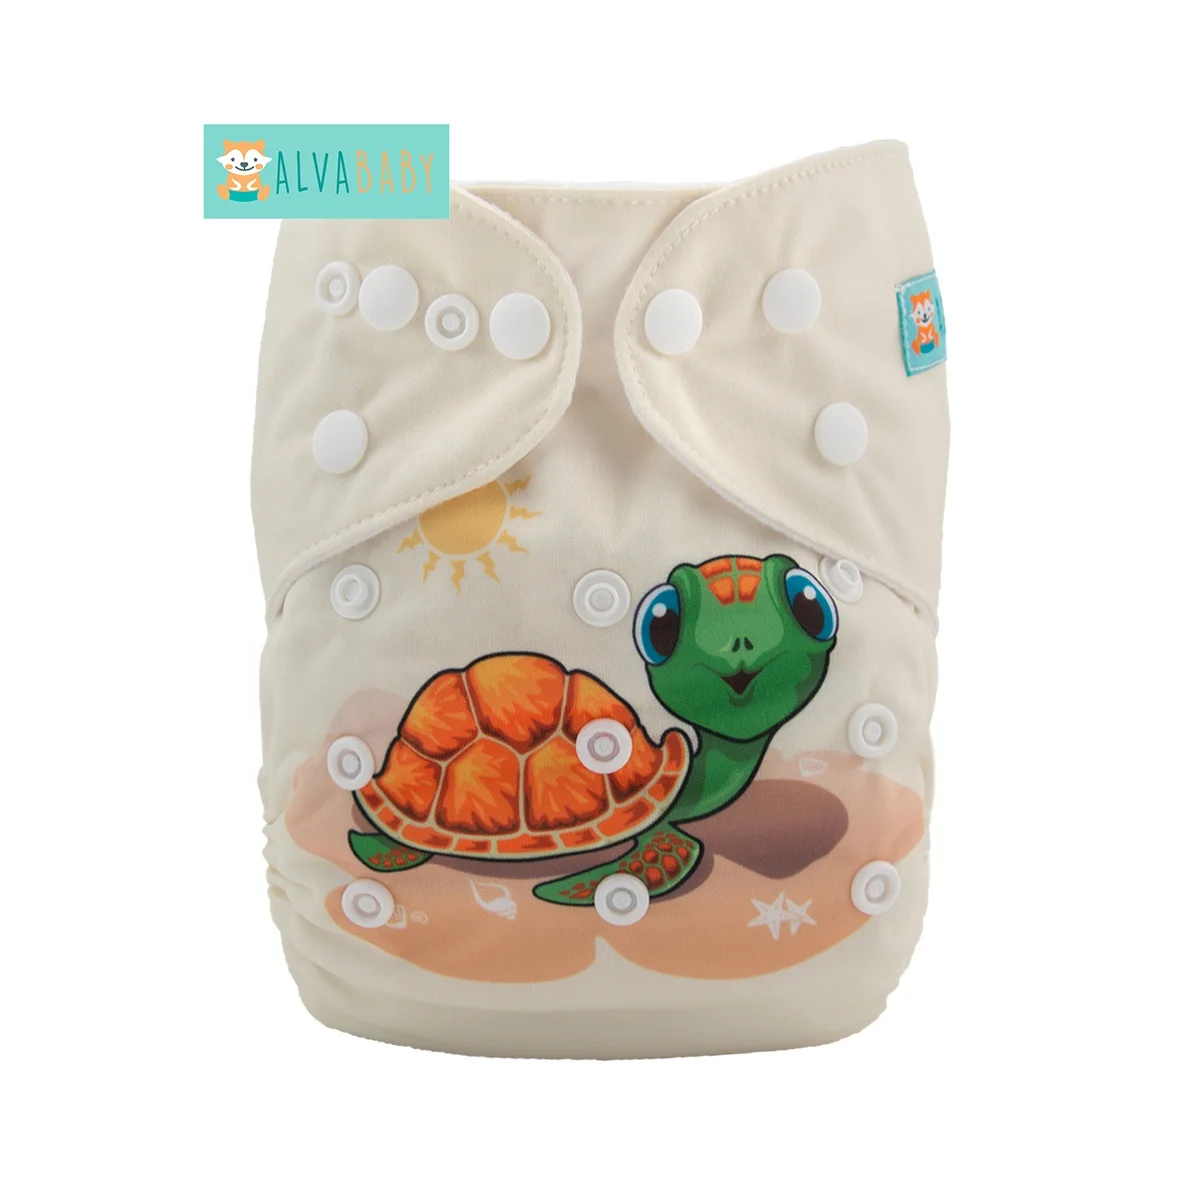 Alvababy Turtle Prints Reusable Cloth Diapers Baby Diapers Wholesale - Buy Reusable  Cloth Diapers,Baby Diapers Wholesale,Reusable Cloth Diapers Wholesale  Product on Alibaba.com